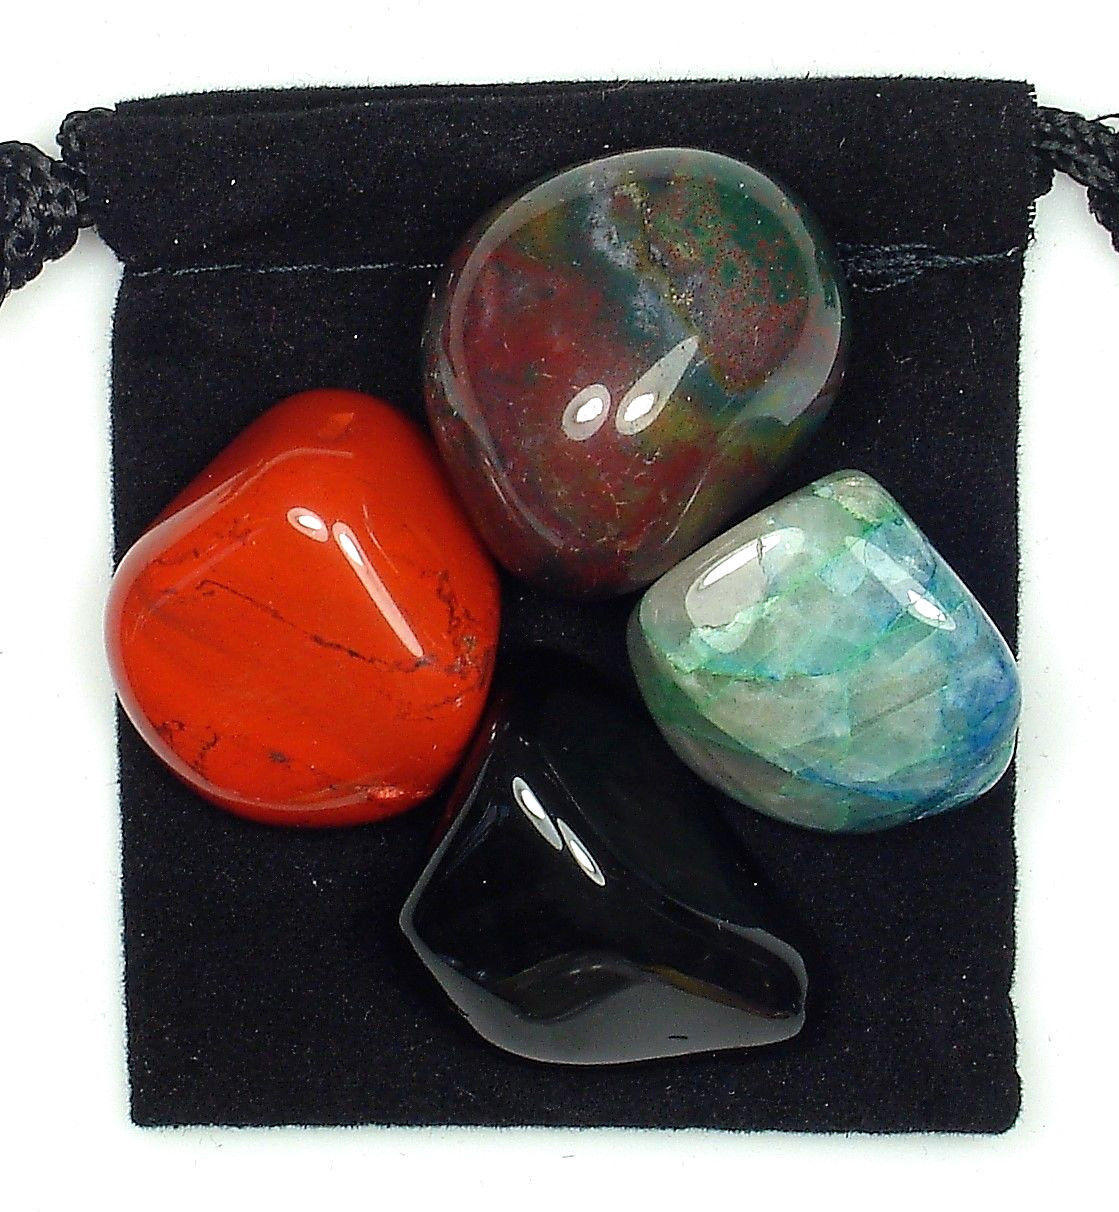 LIVER STRENGTH Tumbled Crystal Healing Set =4 Stones +Pouch +Description Card